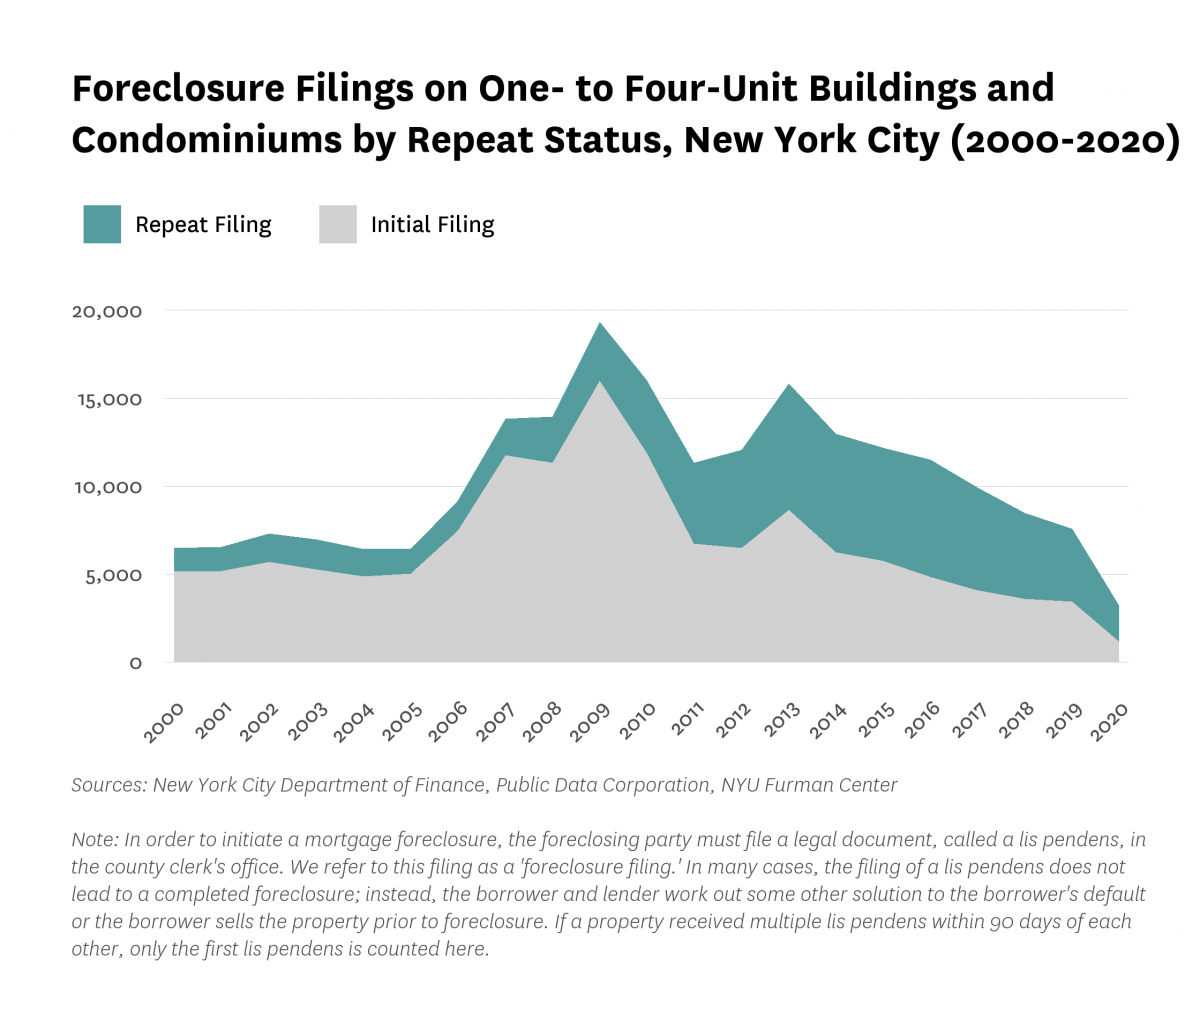 Area chart showing foreclosure filings on one- to four-unit buildings and condominiums by repeat status (repeat and initial filings) in New York City from 2000 to 2020.